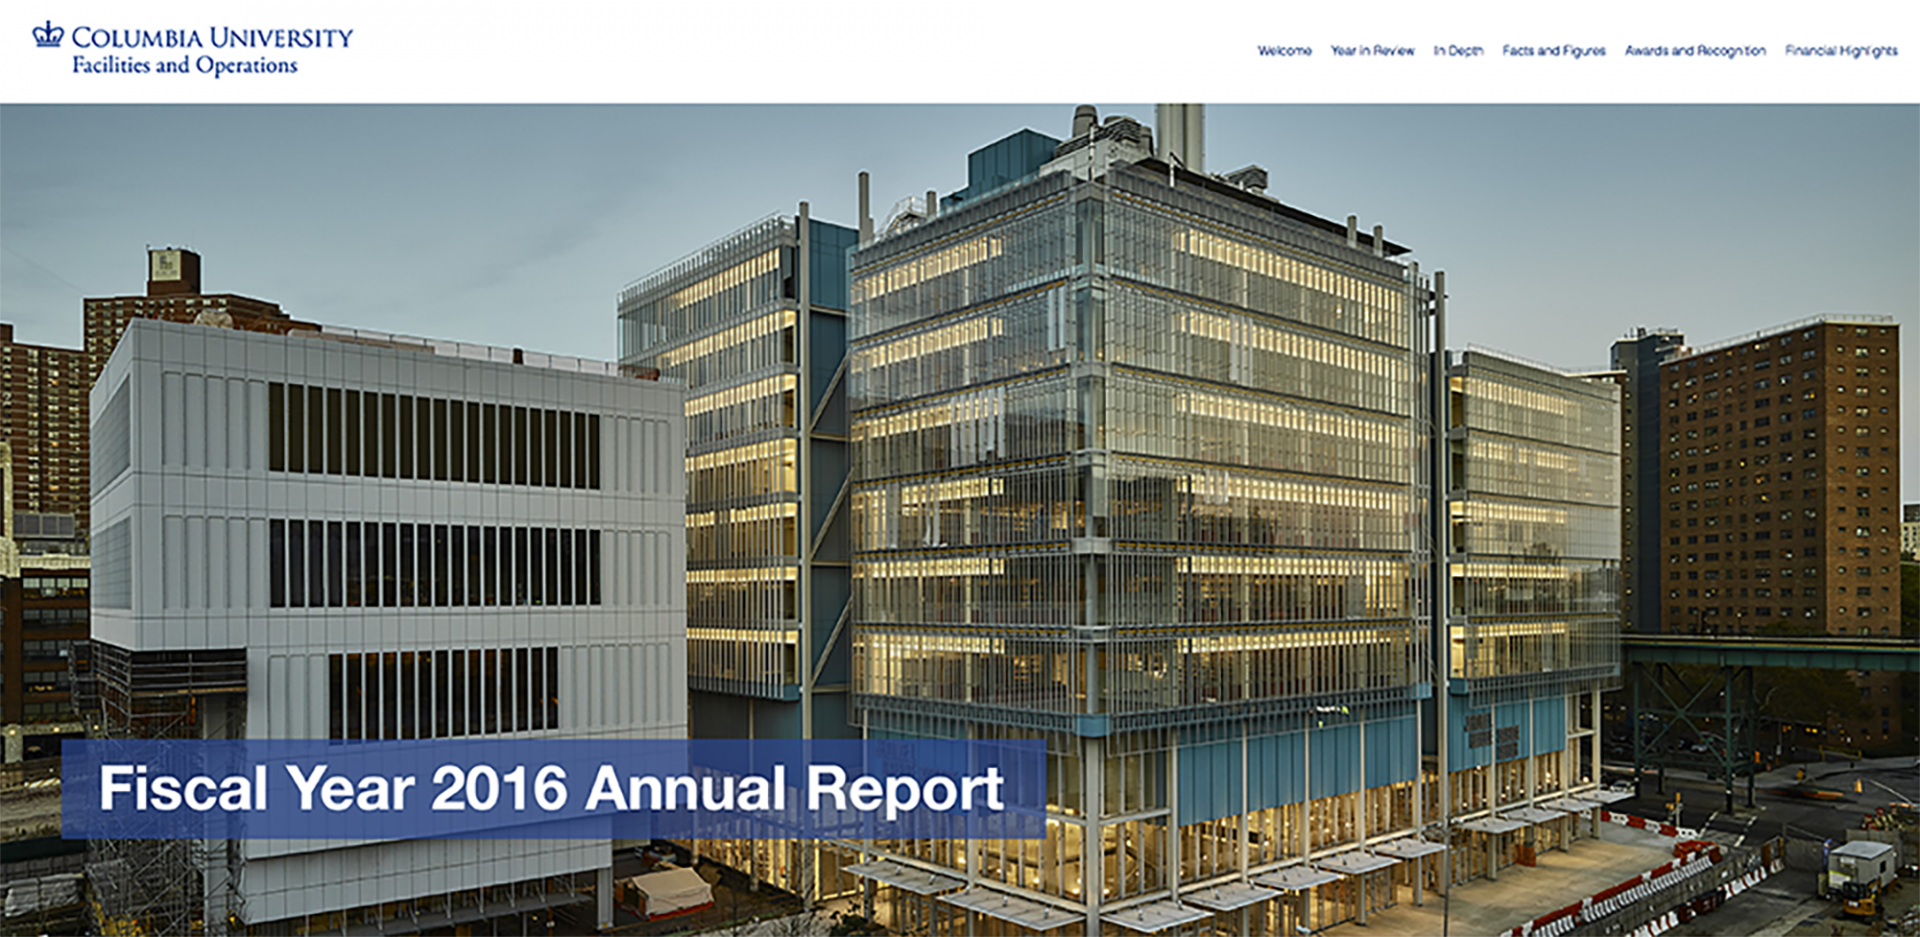 FY 2016 Annual Report